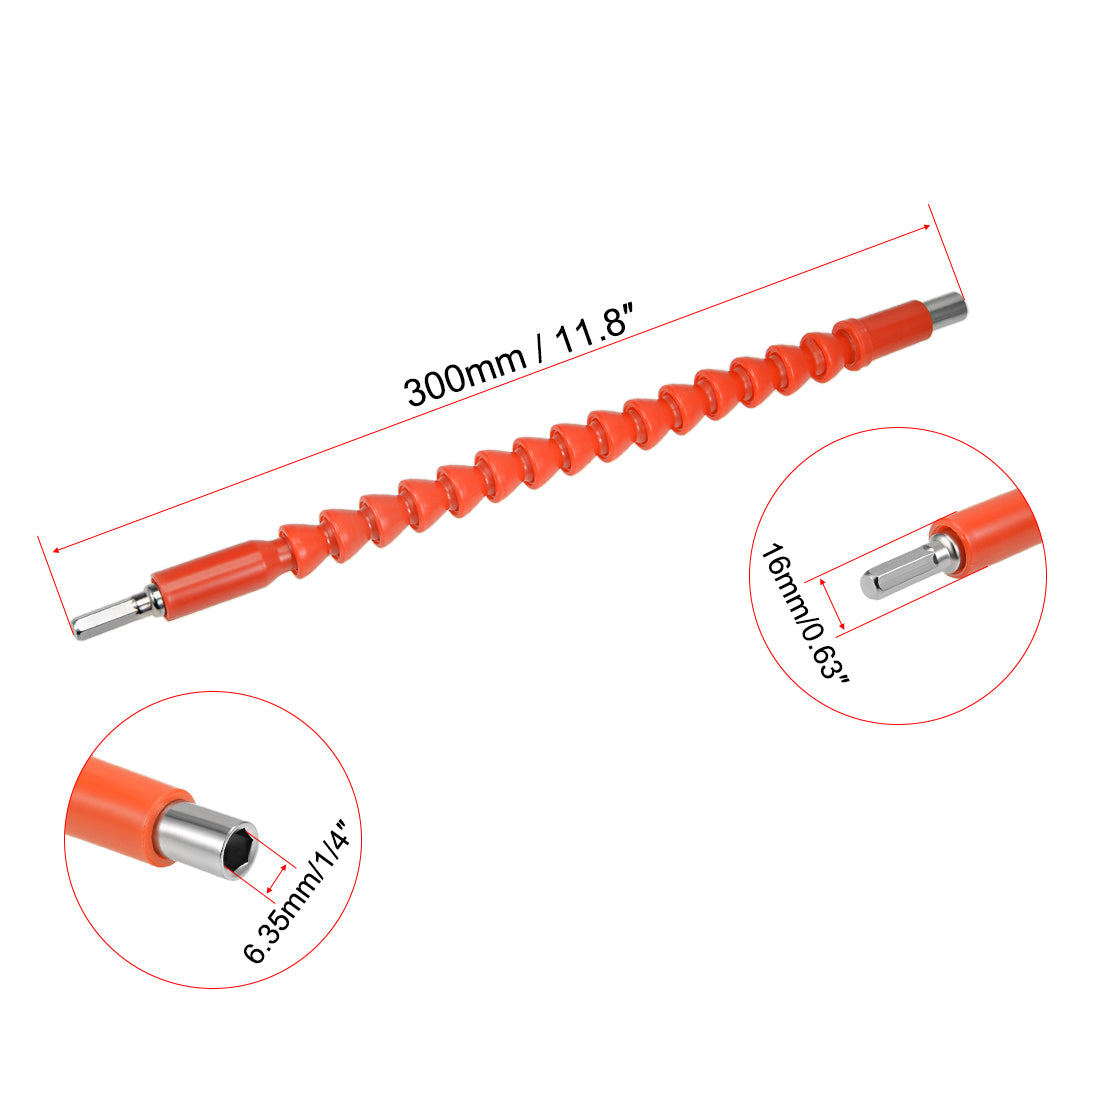 uxcell Uxcell Flexible Extension Screwdriver Bit Holder Magnetic Hex Shaft Screw Drill Connection Tip ,11.8 inch Flex Shaft,1/4''-Hexagon Drill Orange